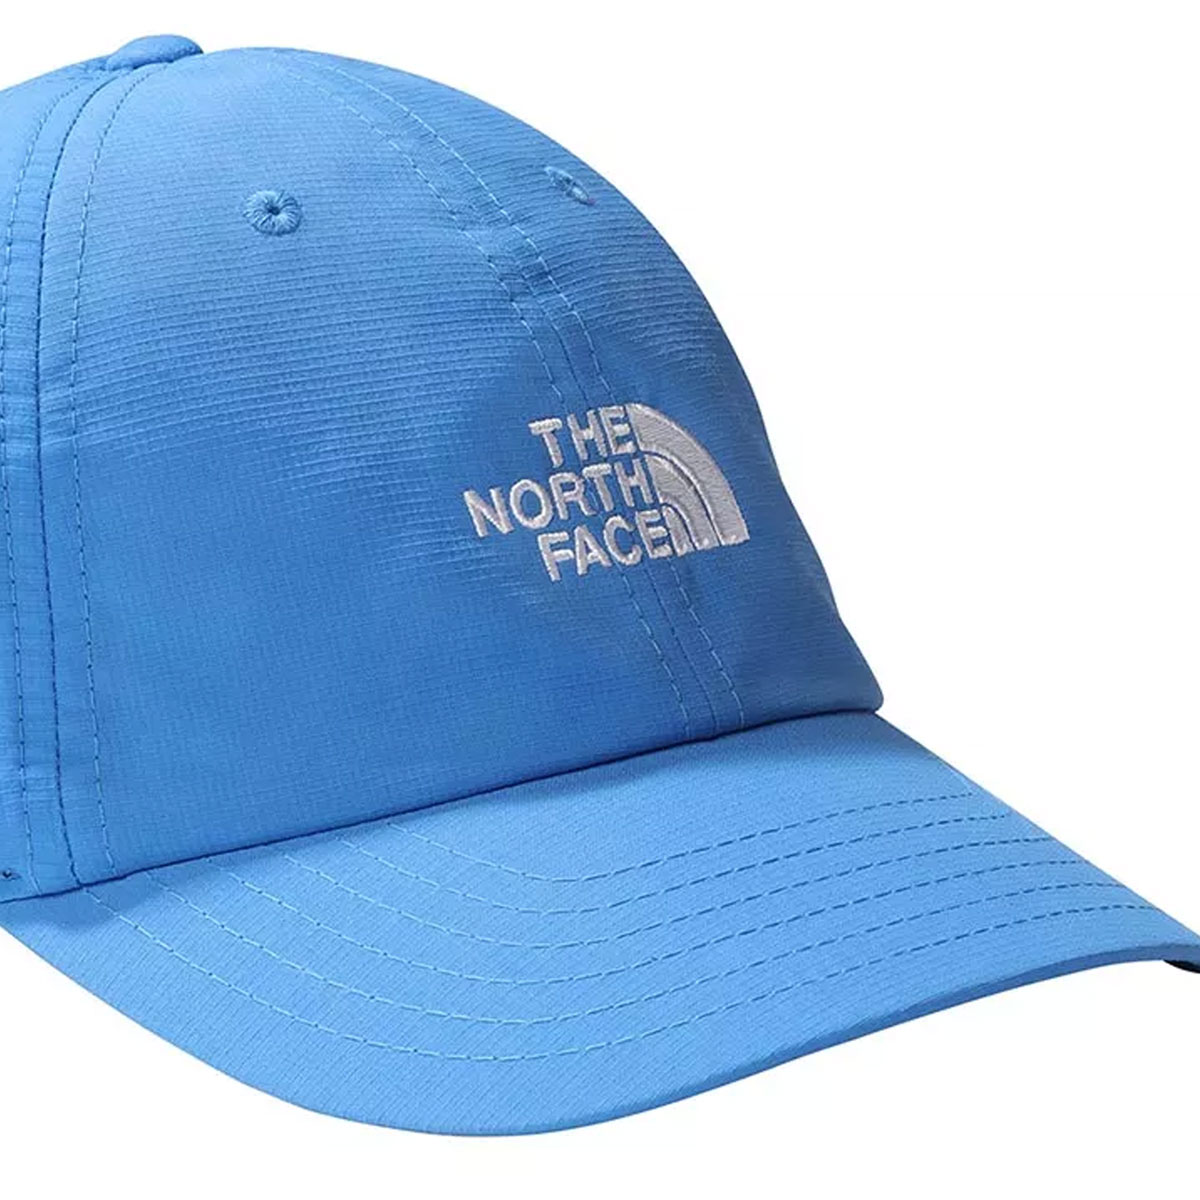 THE NORTH FACE - KIDS 66